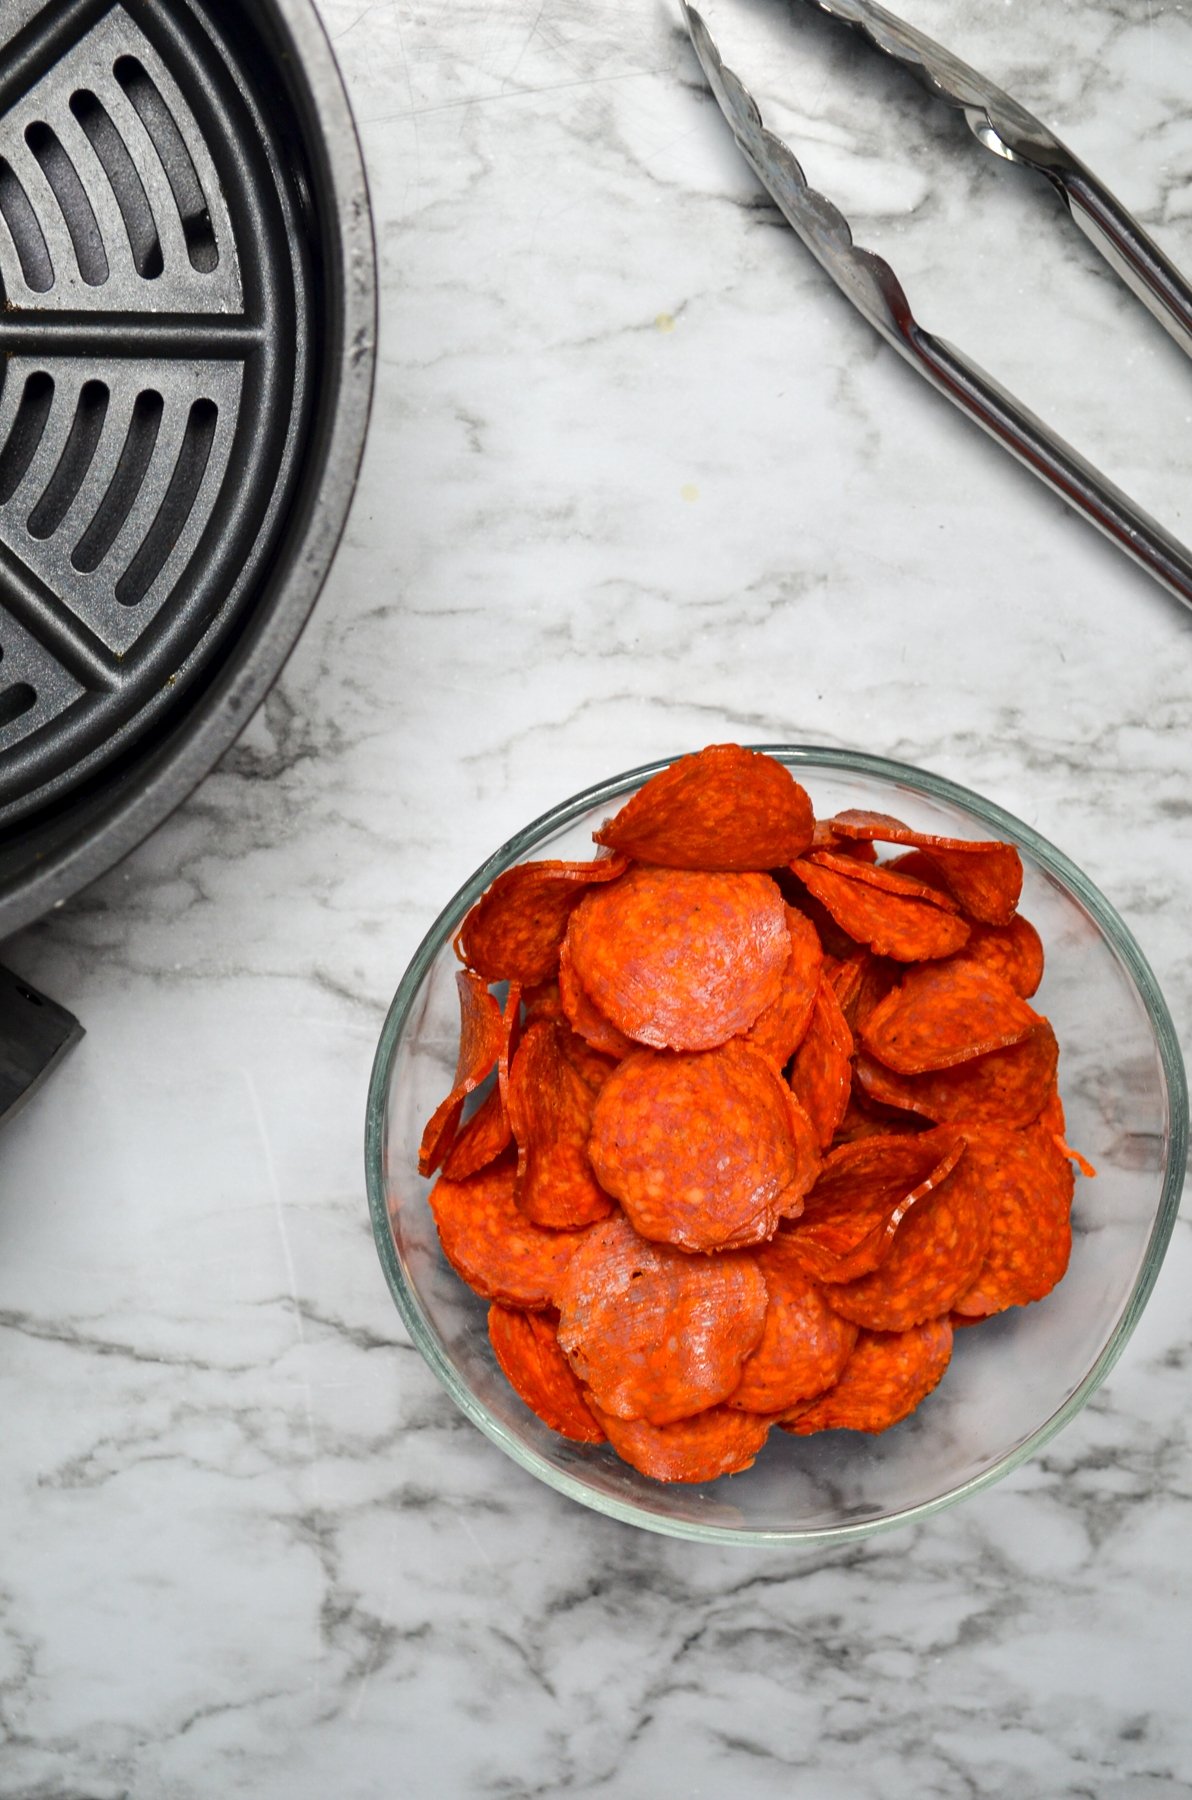 A bowl of pepperoni, with an air fryer basket and a pair of tongs on the side.